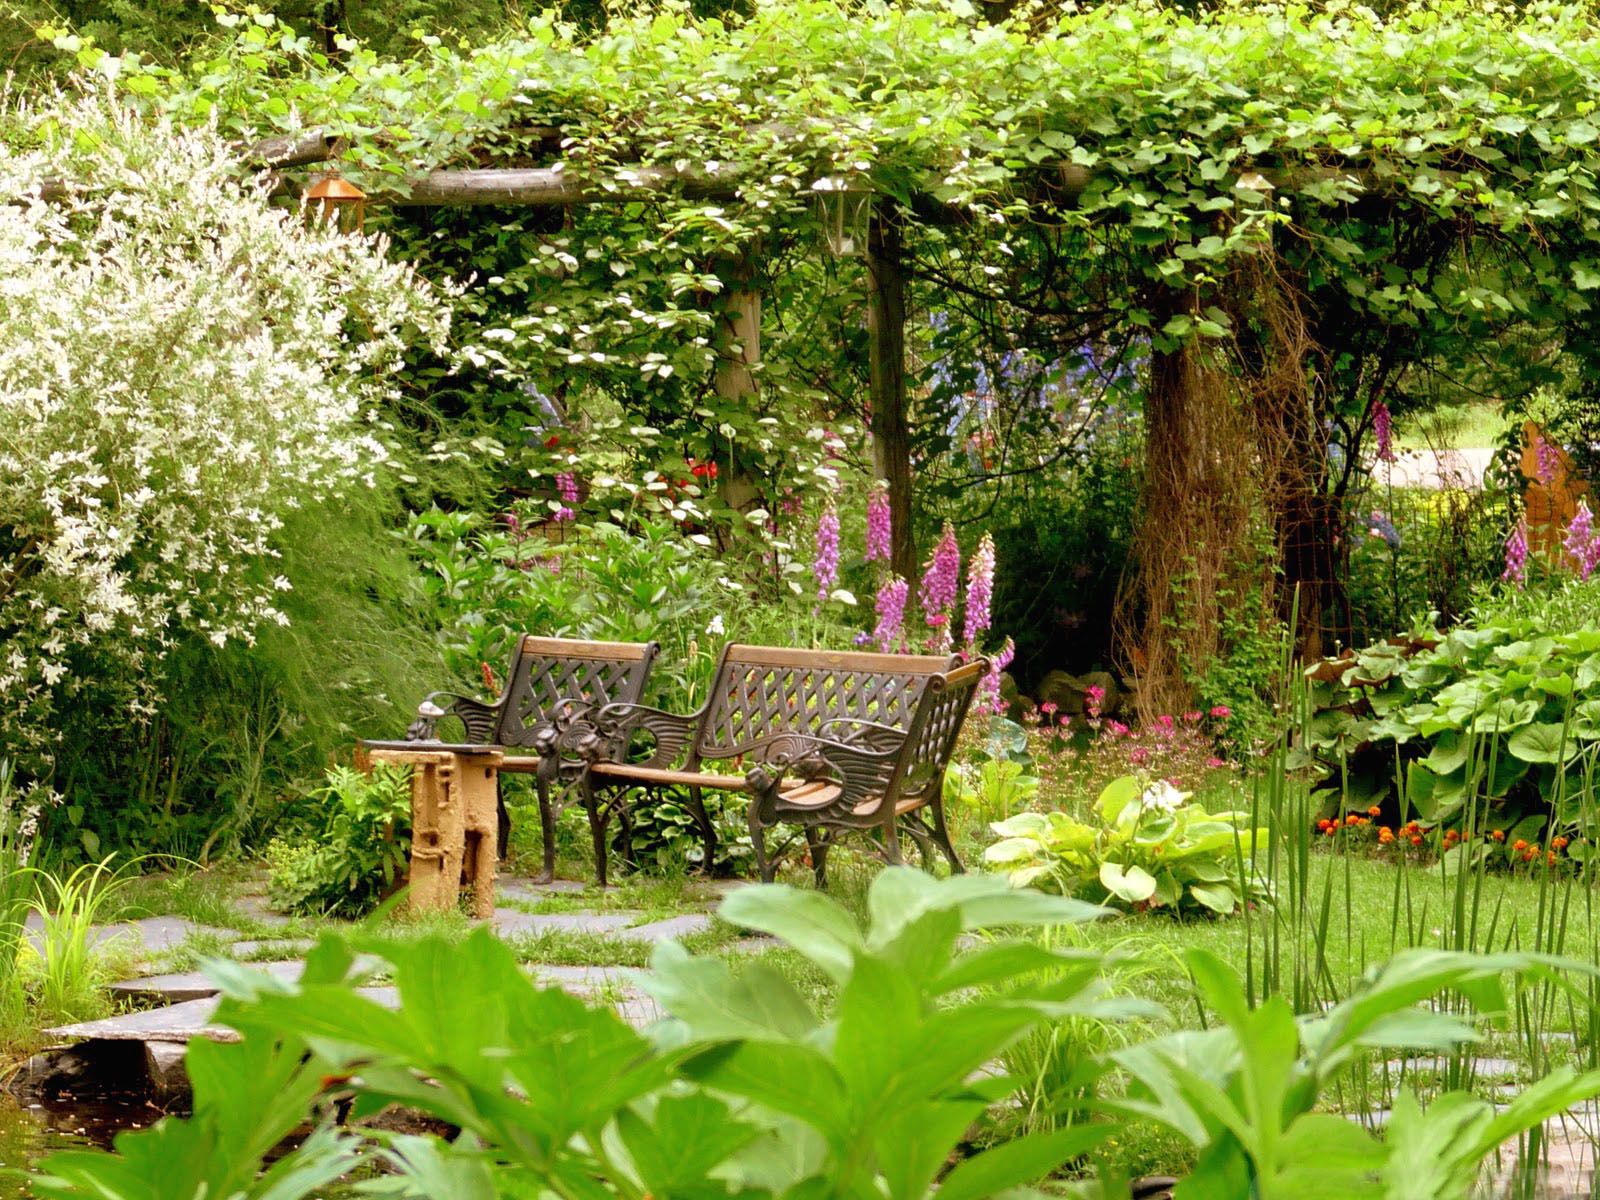 Wallpaper Fair: Peaceful Summer Garden Picture For House Decorate